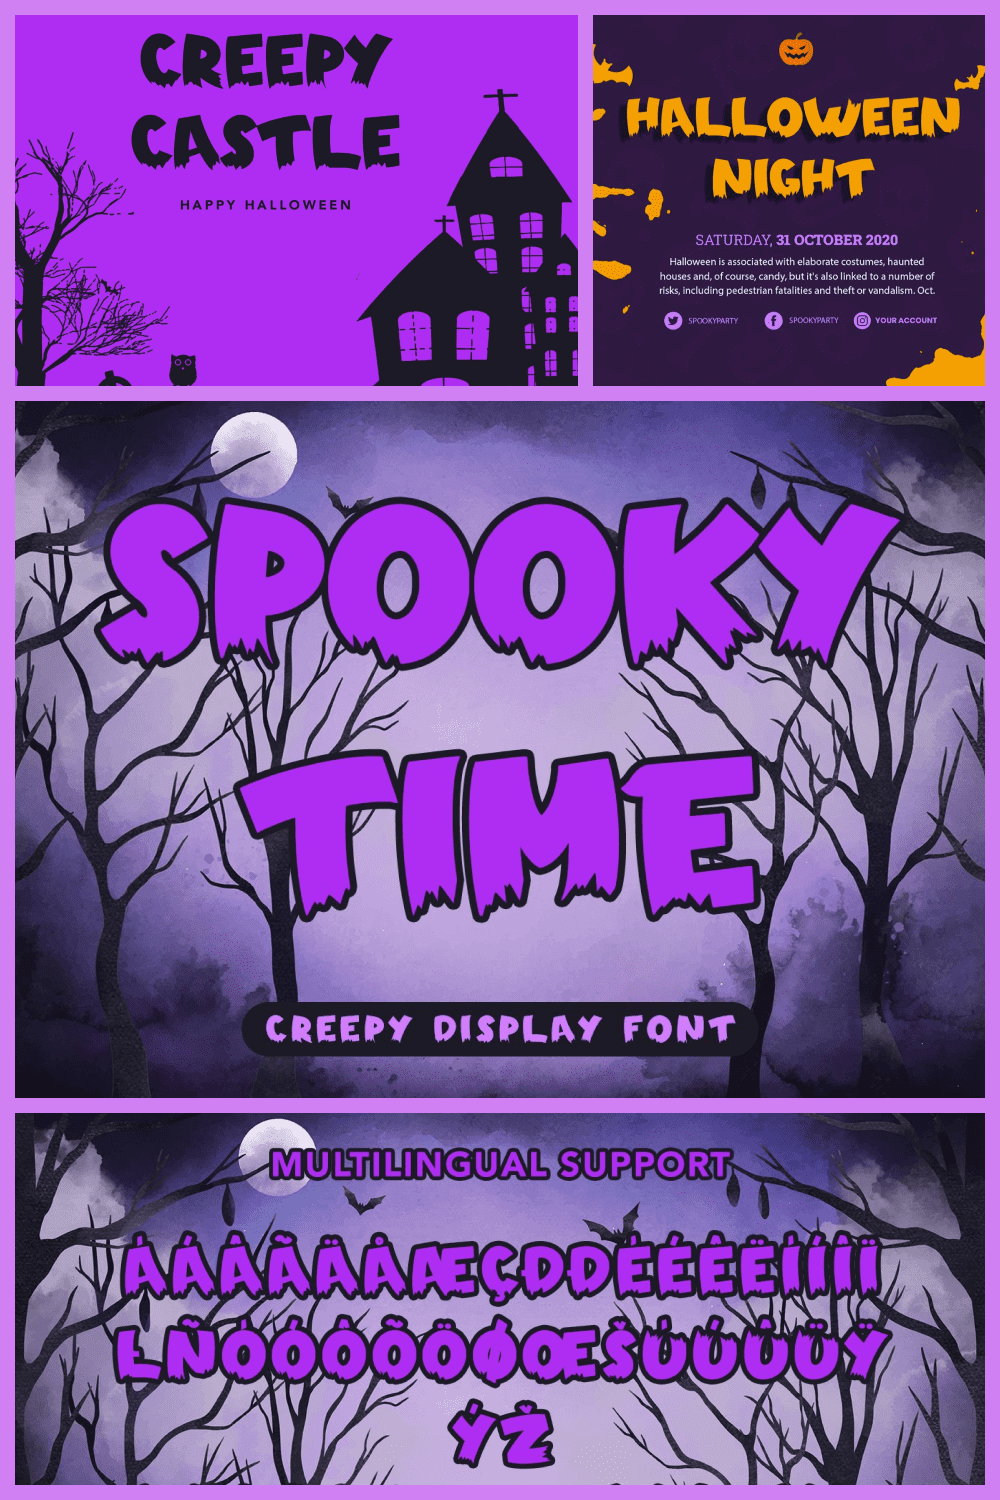 Spooky Time Display Typeface.